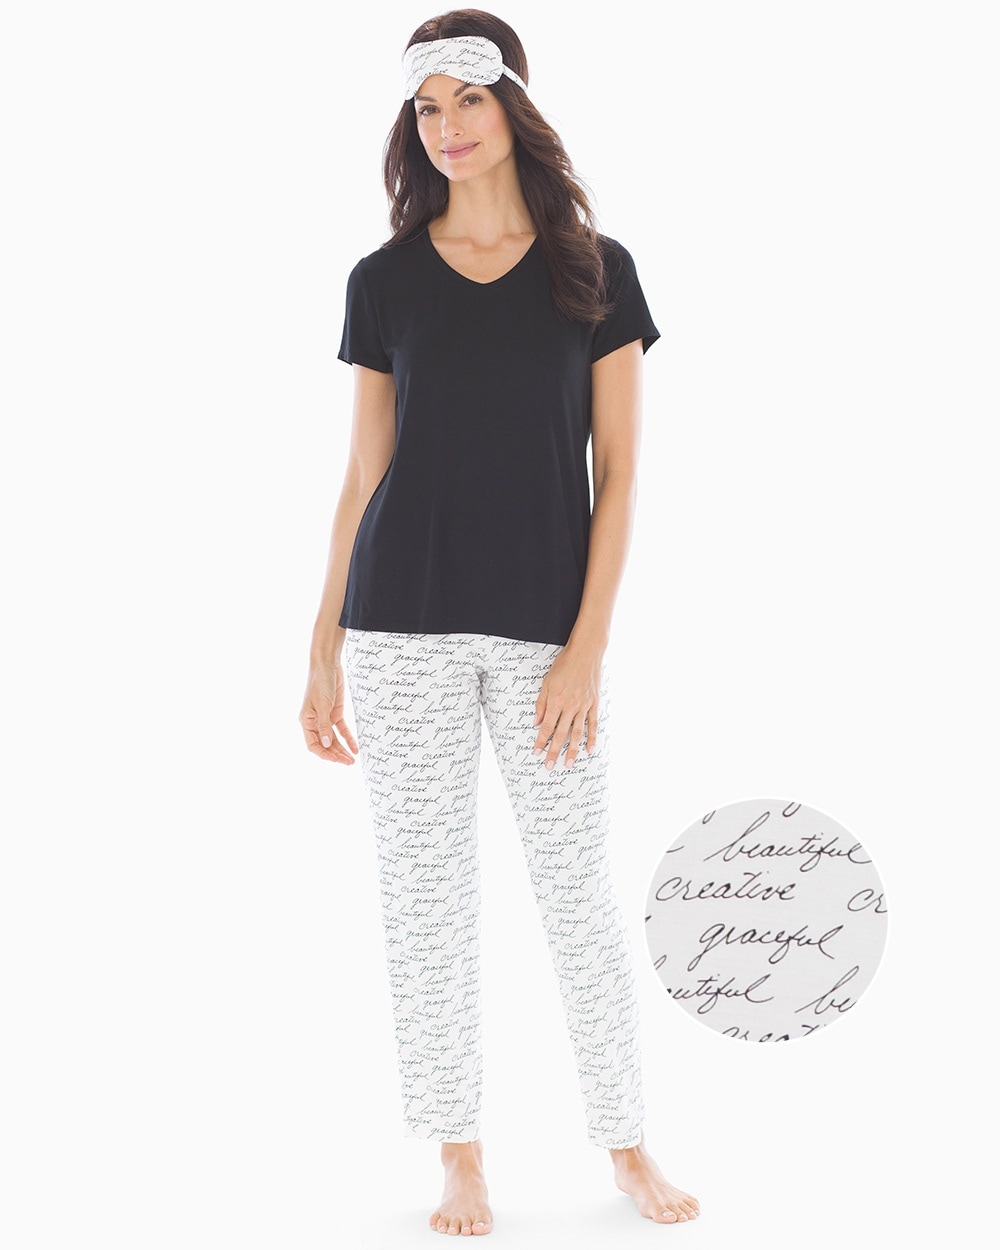 Cool Nights V-Neck Short Sleeve Ankle Length Pajama Set with Eyemask\u00A0Written Words with Black